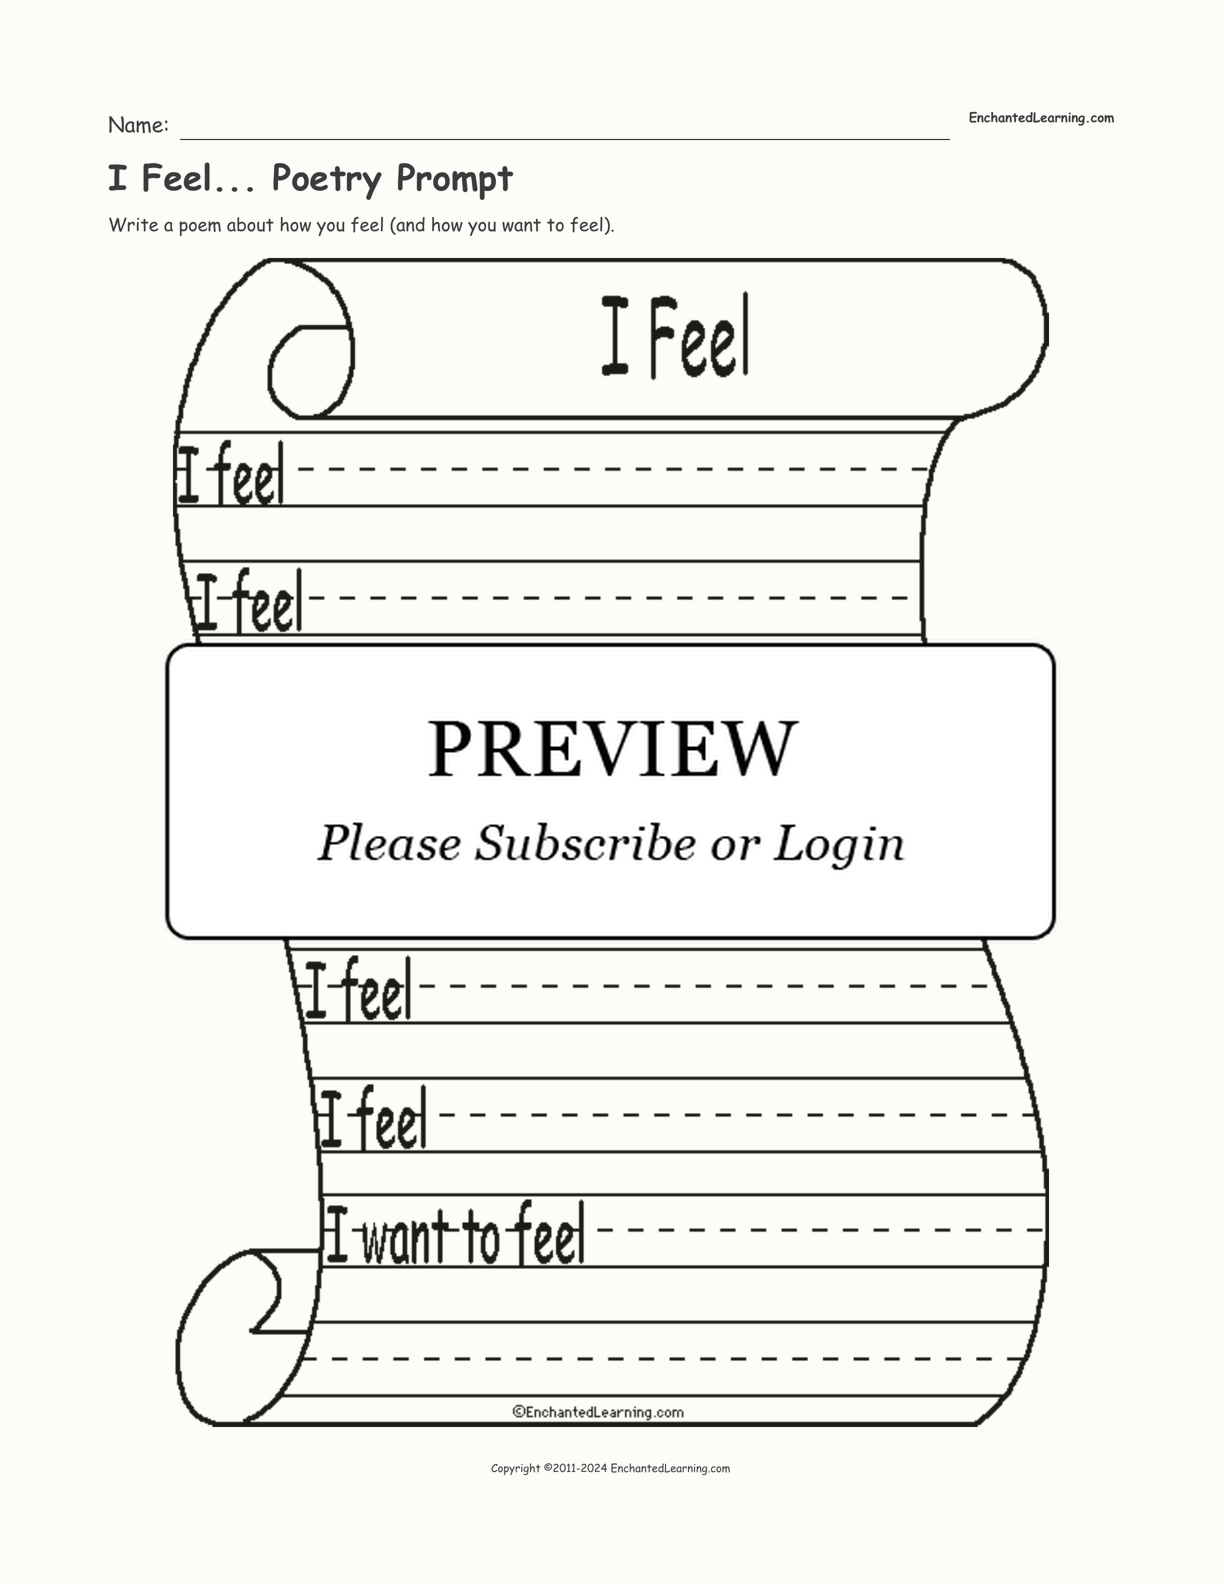 I Feel... Poetry Prompt interactive worksheet page 1